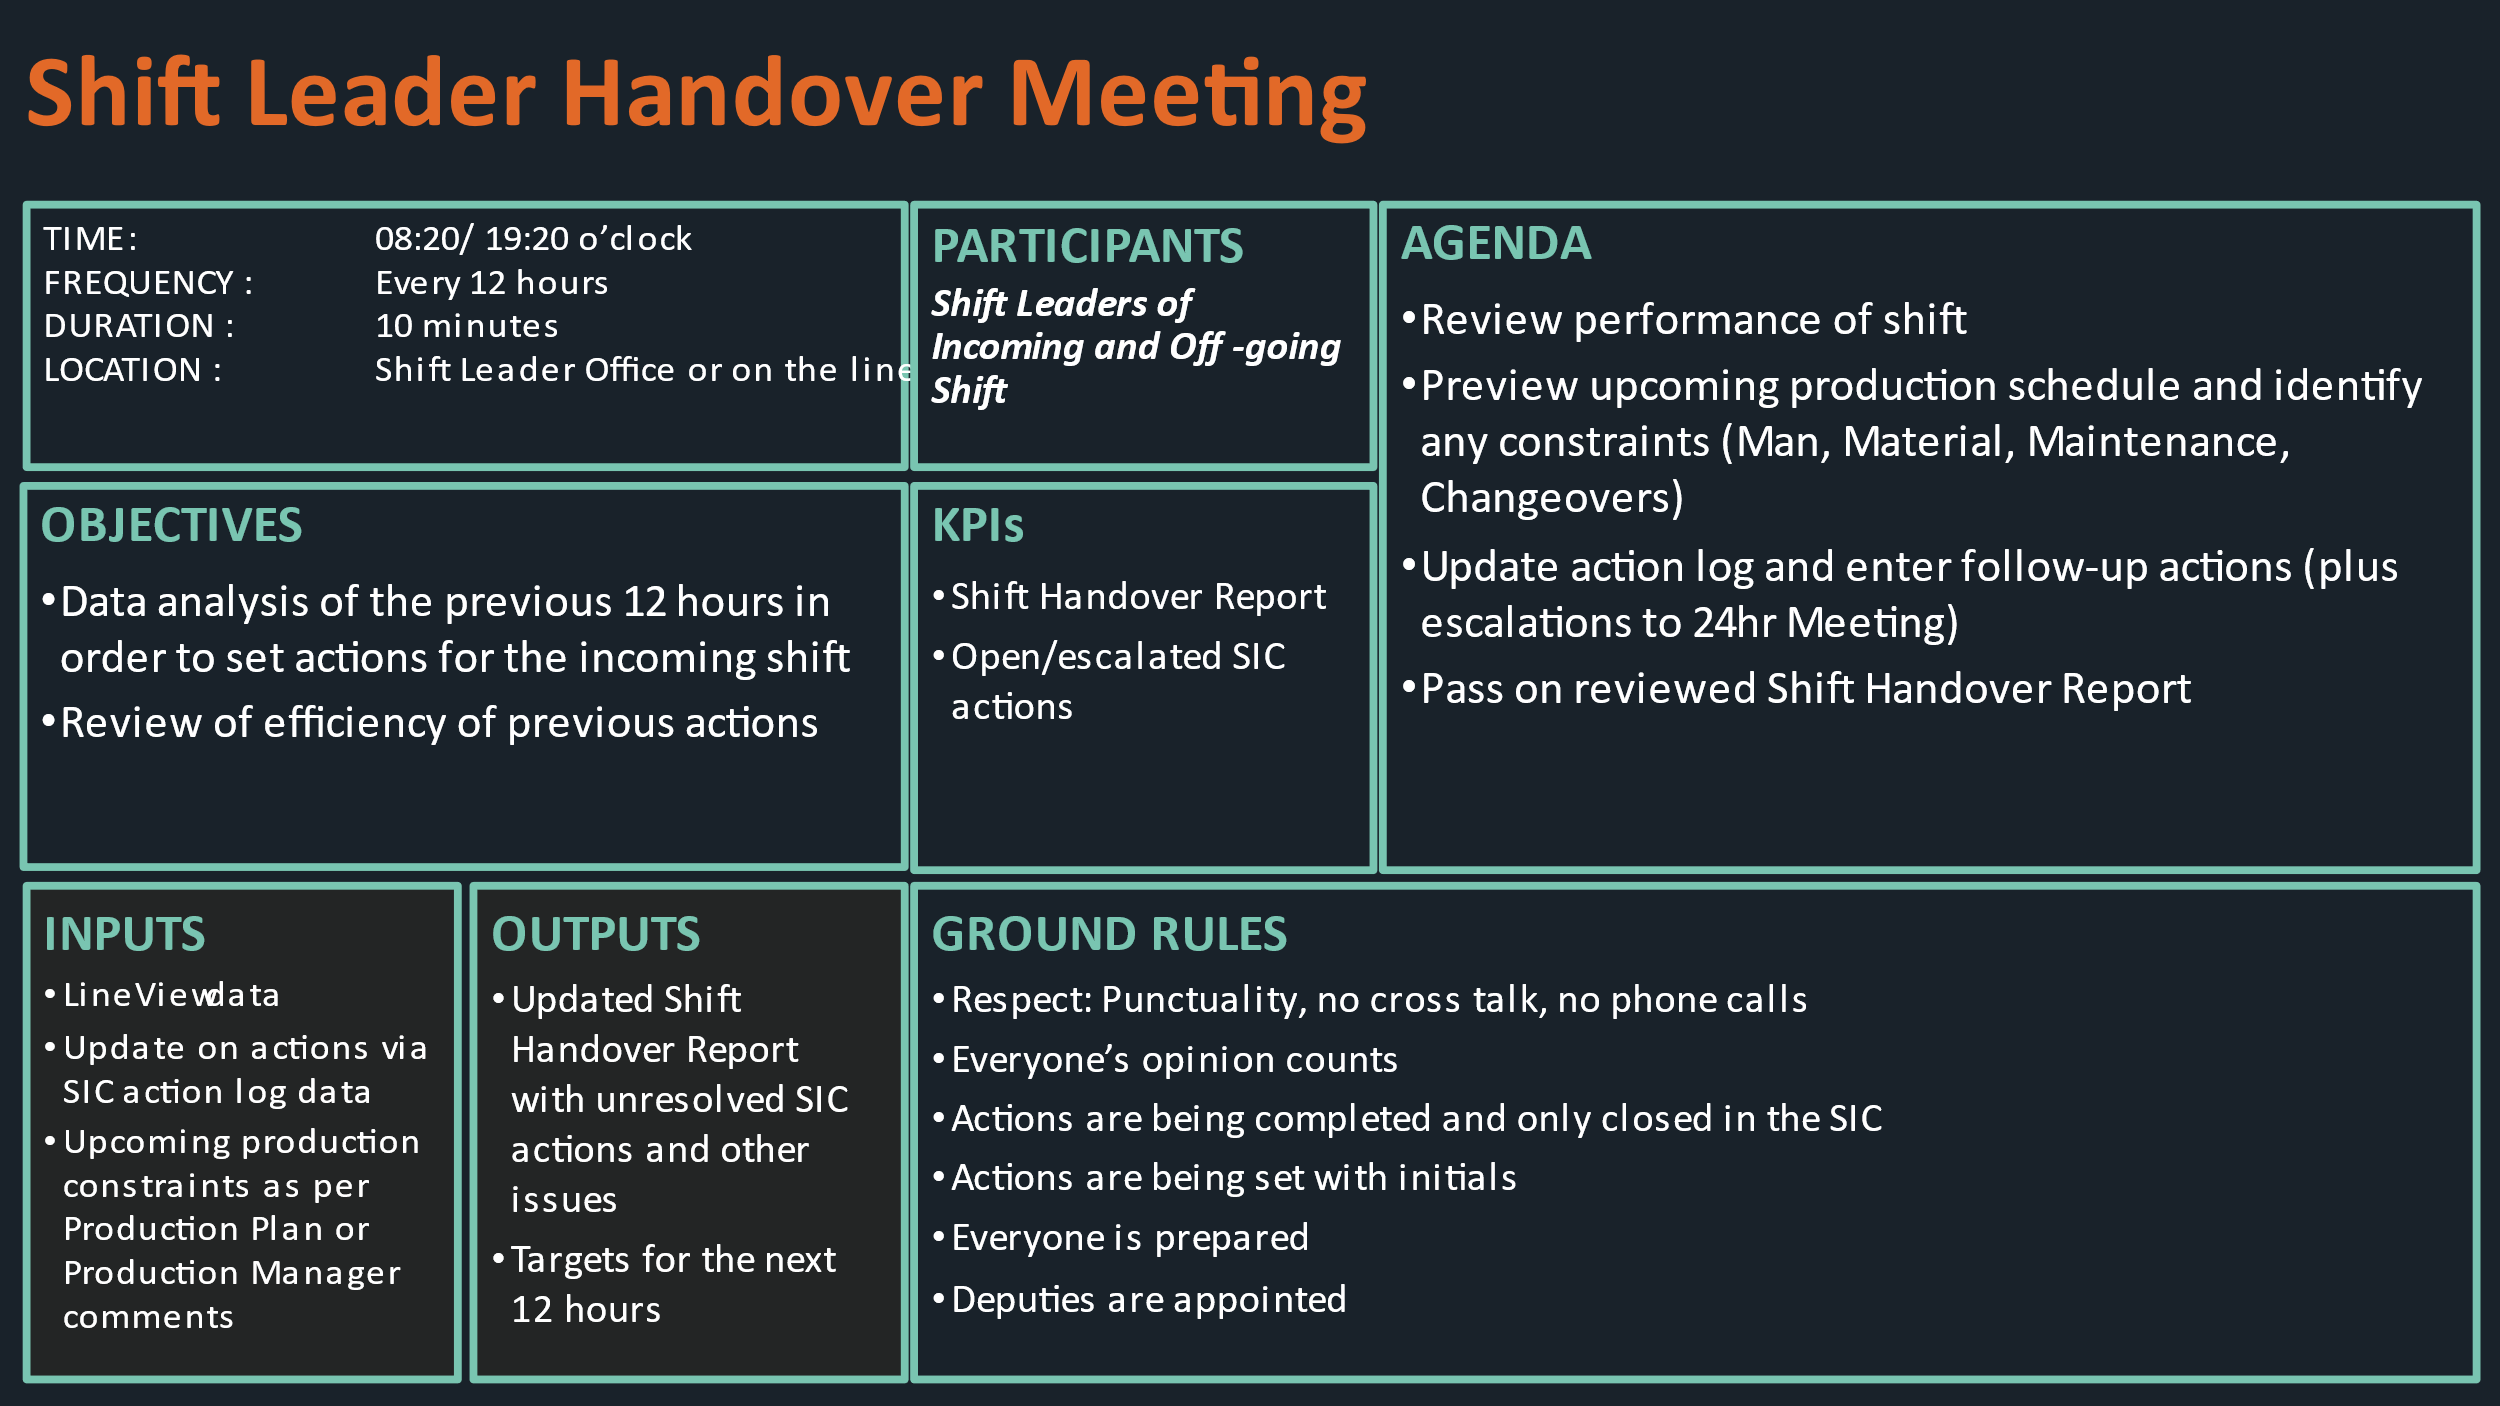 how-to-use-shift-handover-policies-checklists-for-better-oee-results